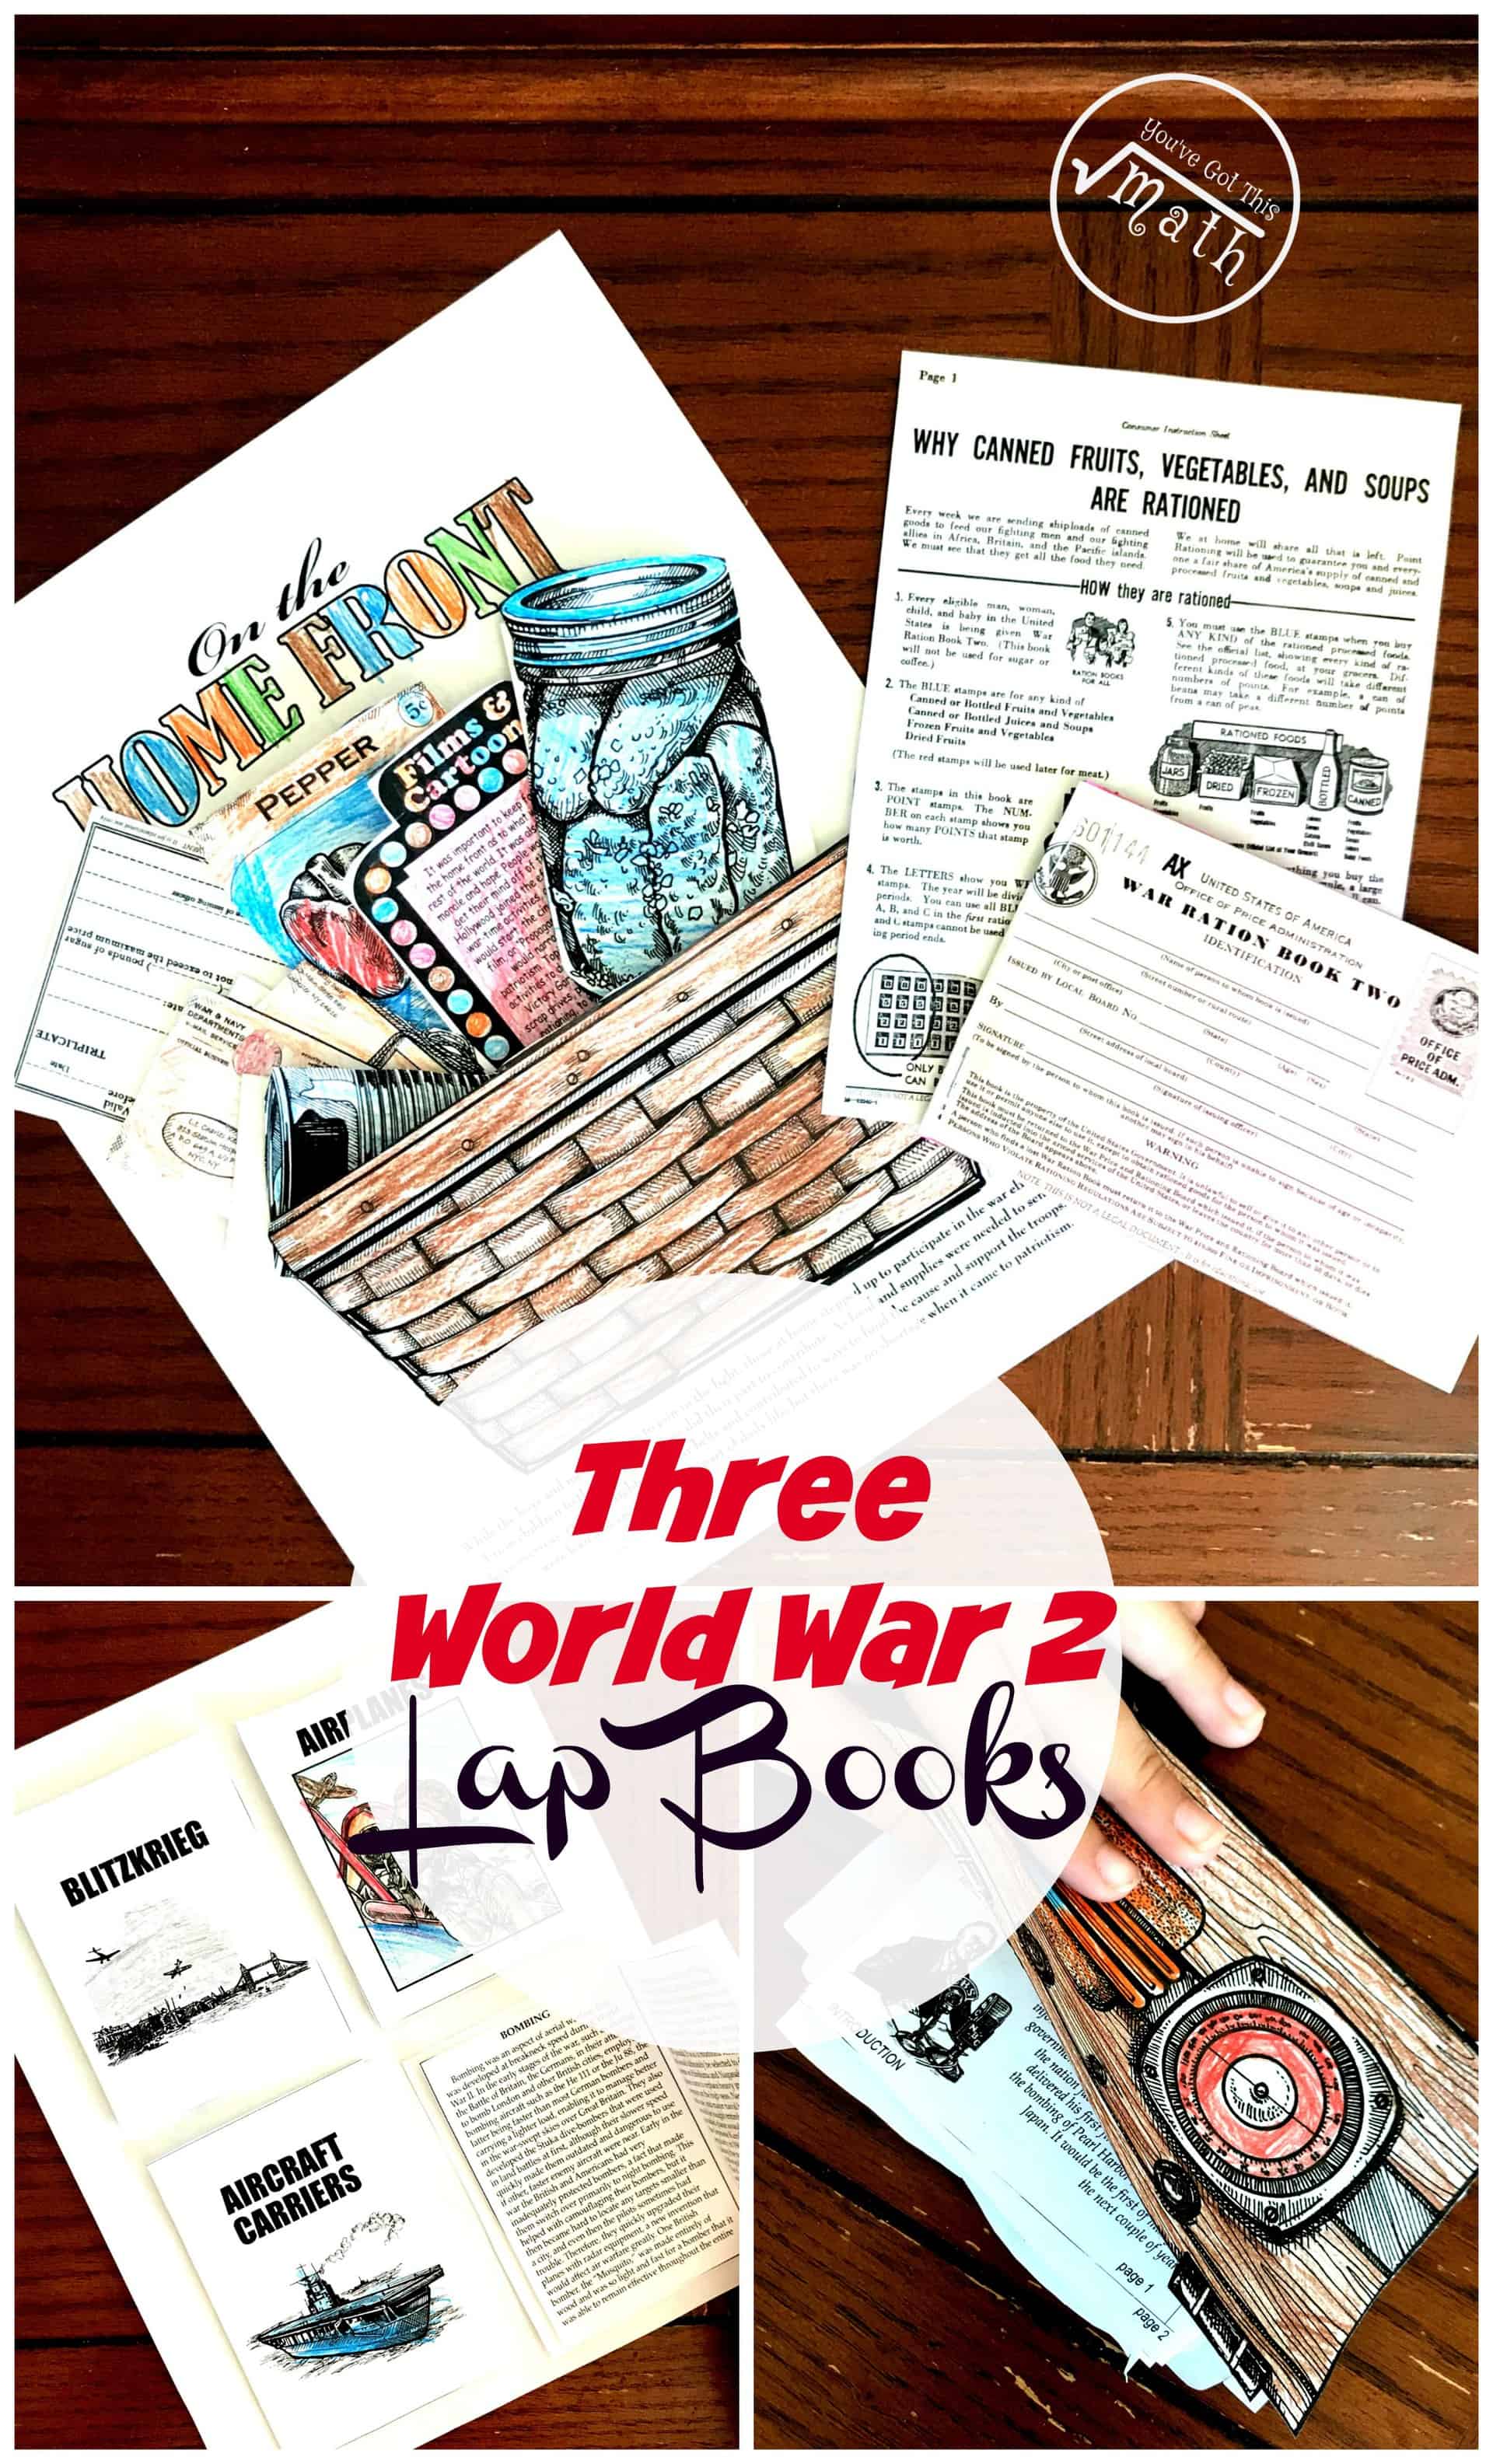 These World War 2 Lap Books are a wonderful way to learn about Roosevelt and his fireside chats, weapons used during WW2, and what was happening at home while the soldiers fought.